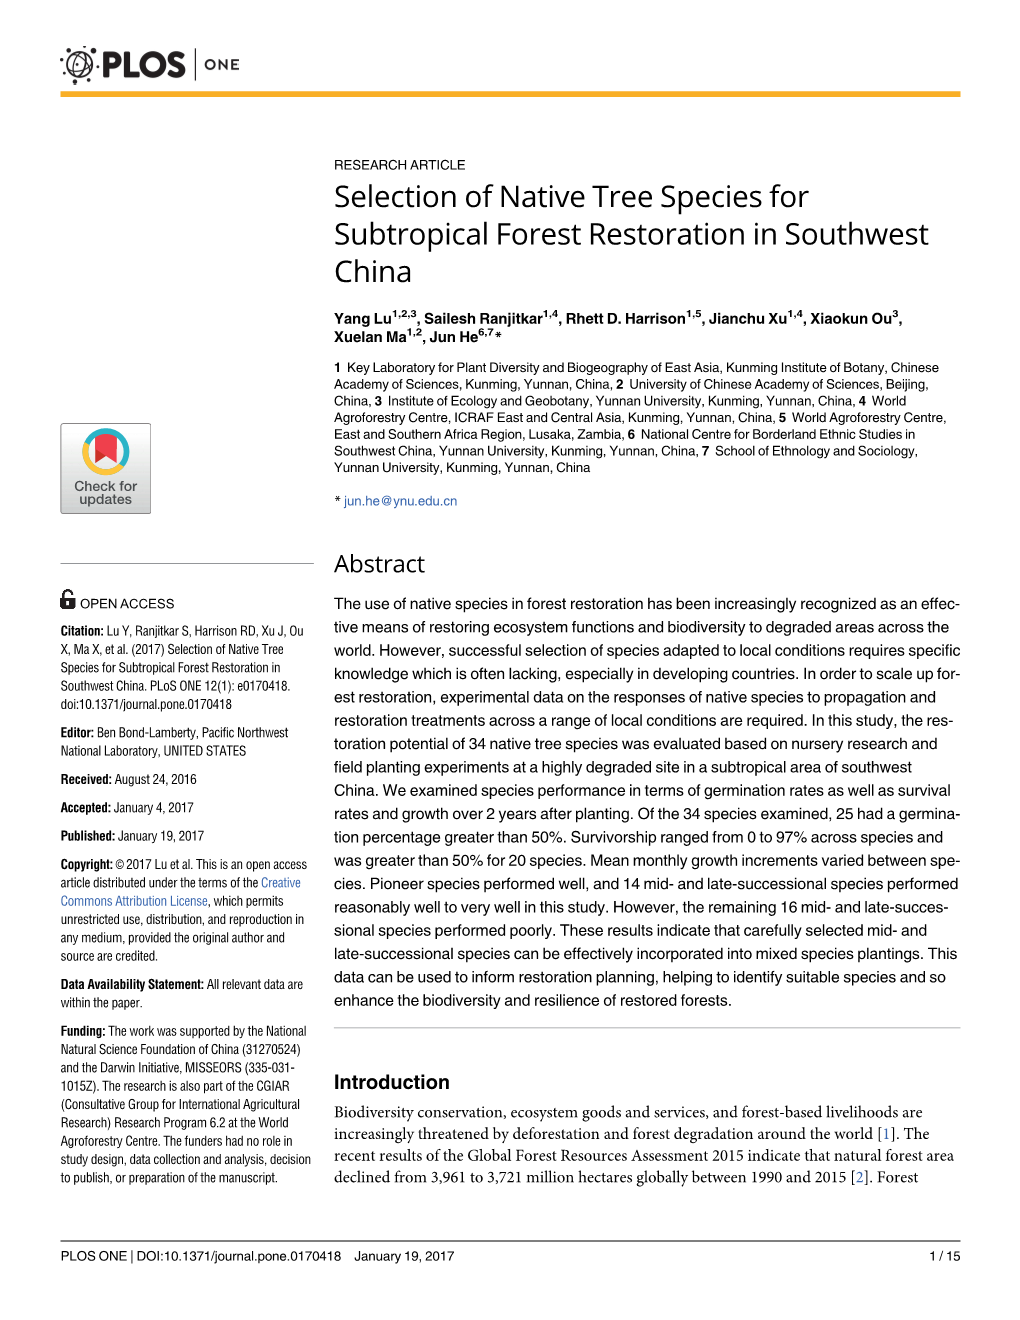 Selection of Native Tree Species for Subtropical Forest Restoration in Southwest China